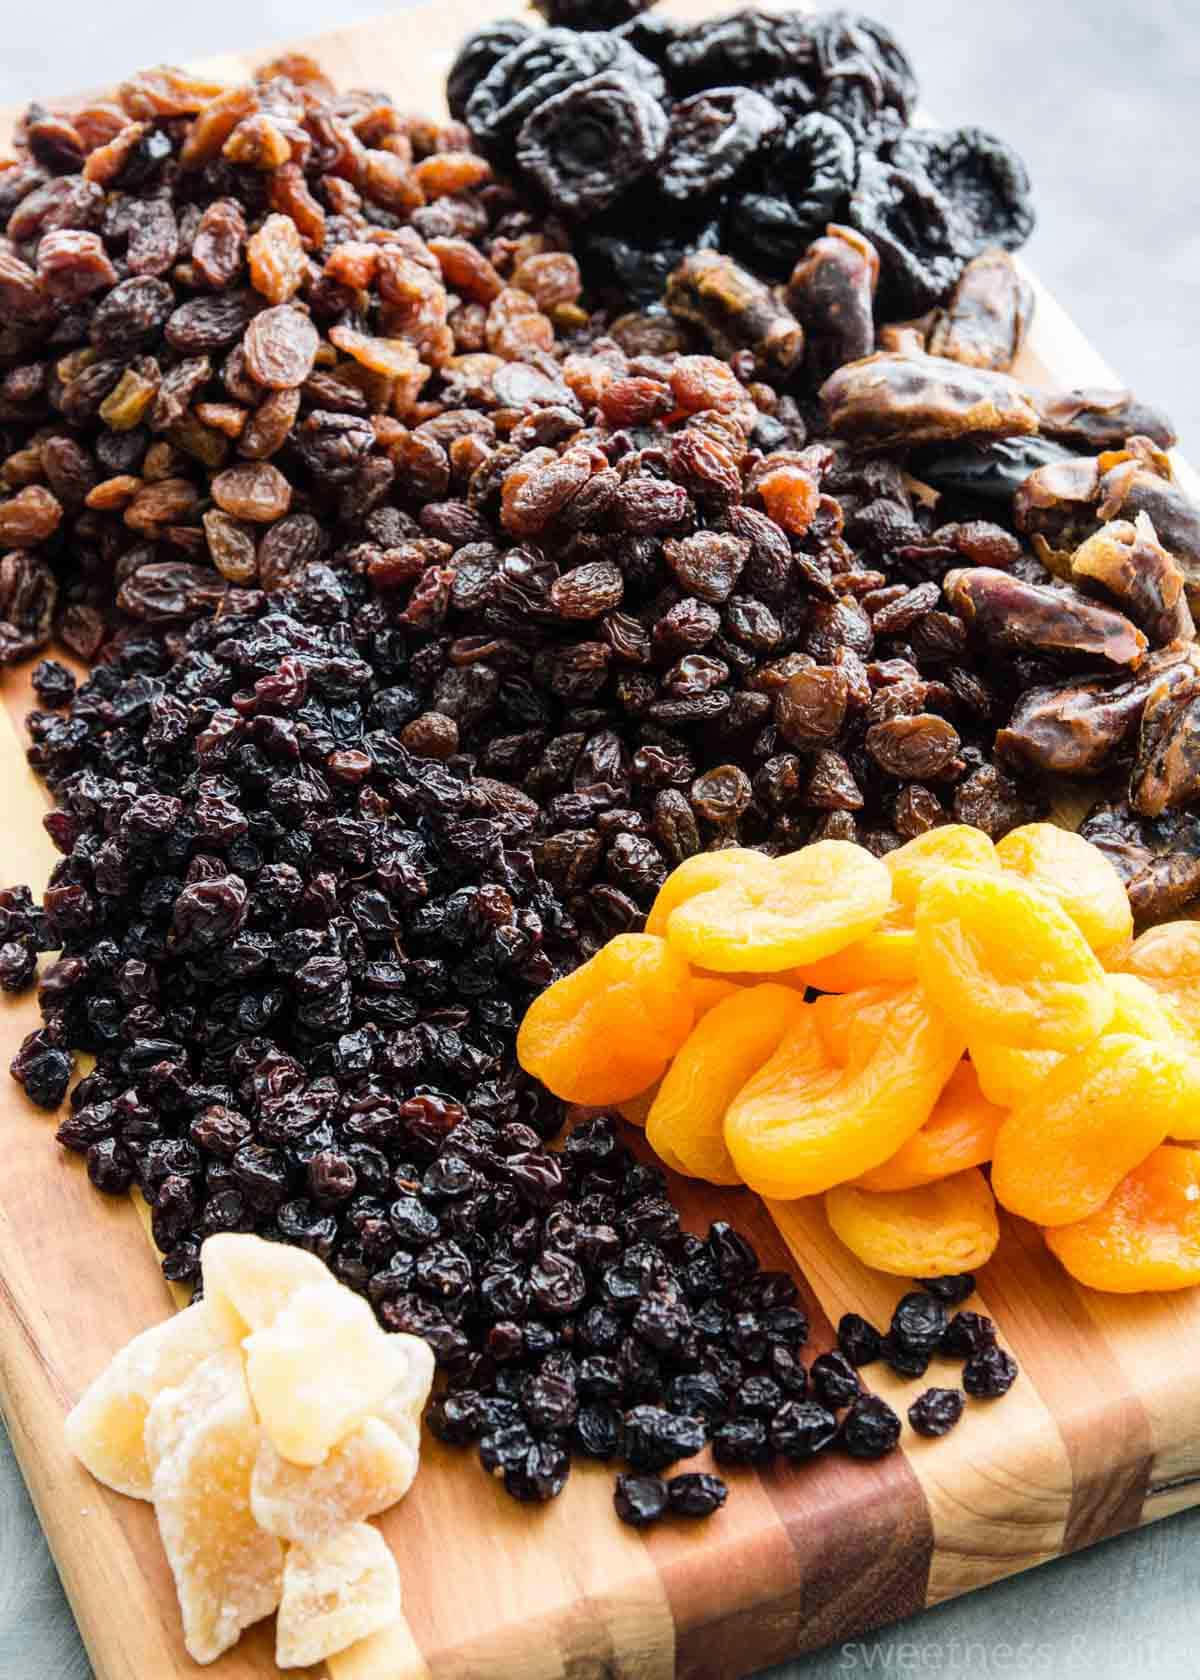 Dried fruits - sultanas, raisins, dates, prunes, currants, apricots and glacé ginger - on a wooden board.